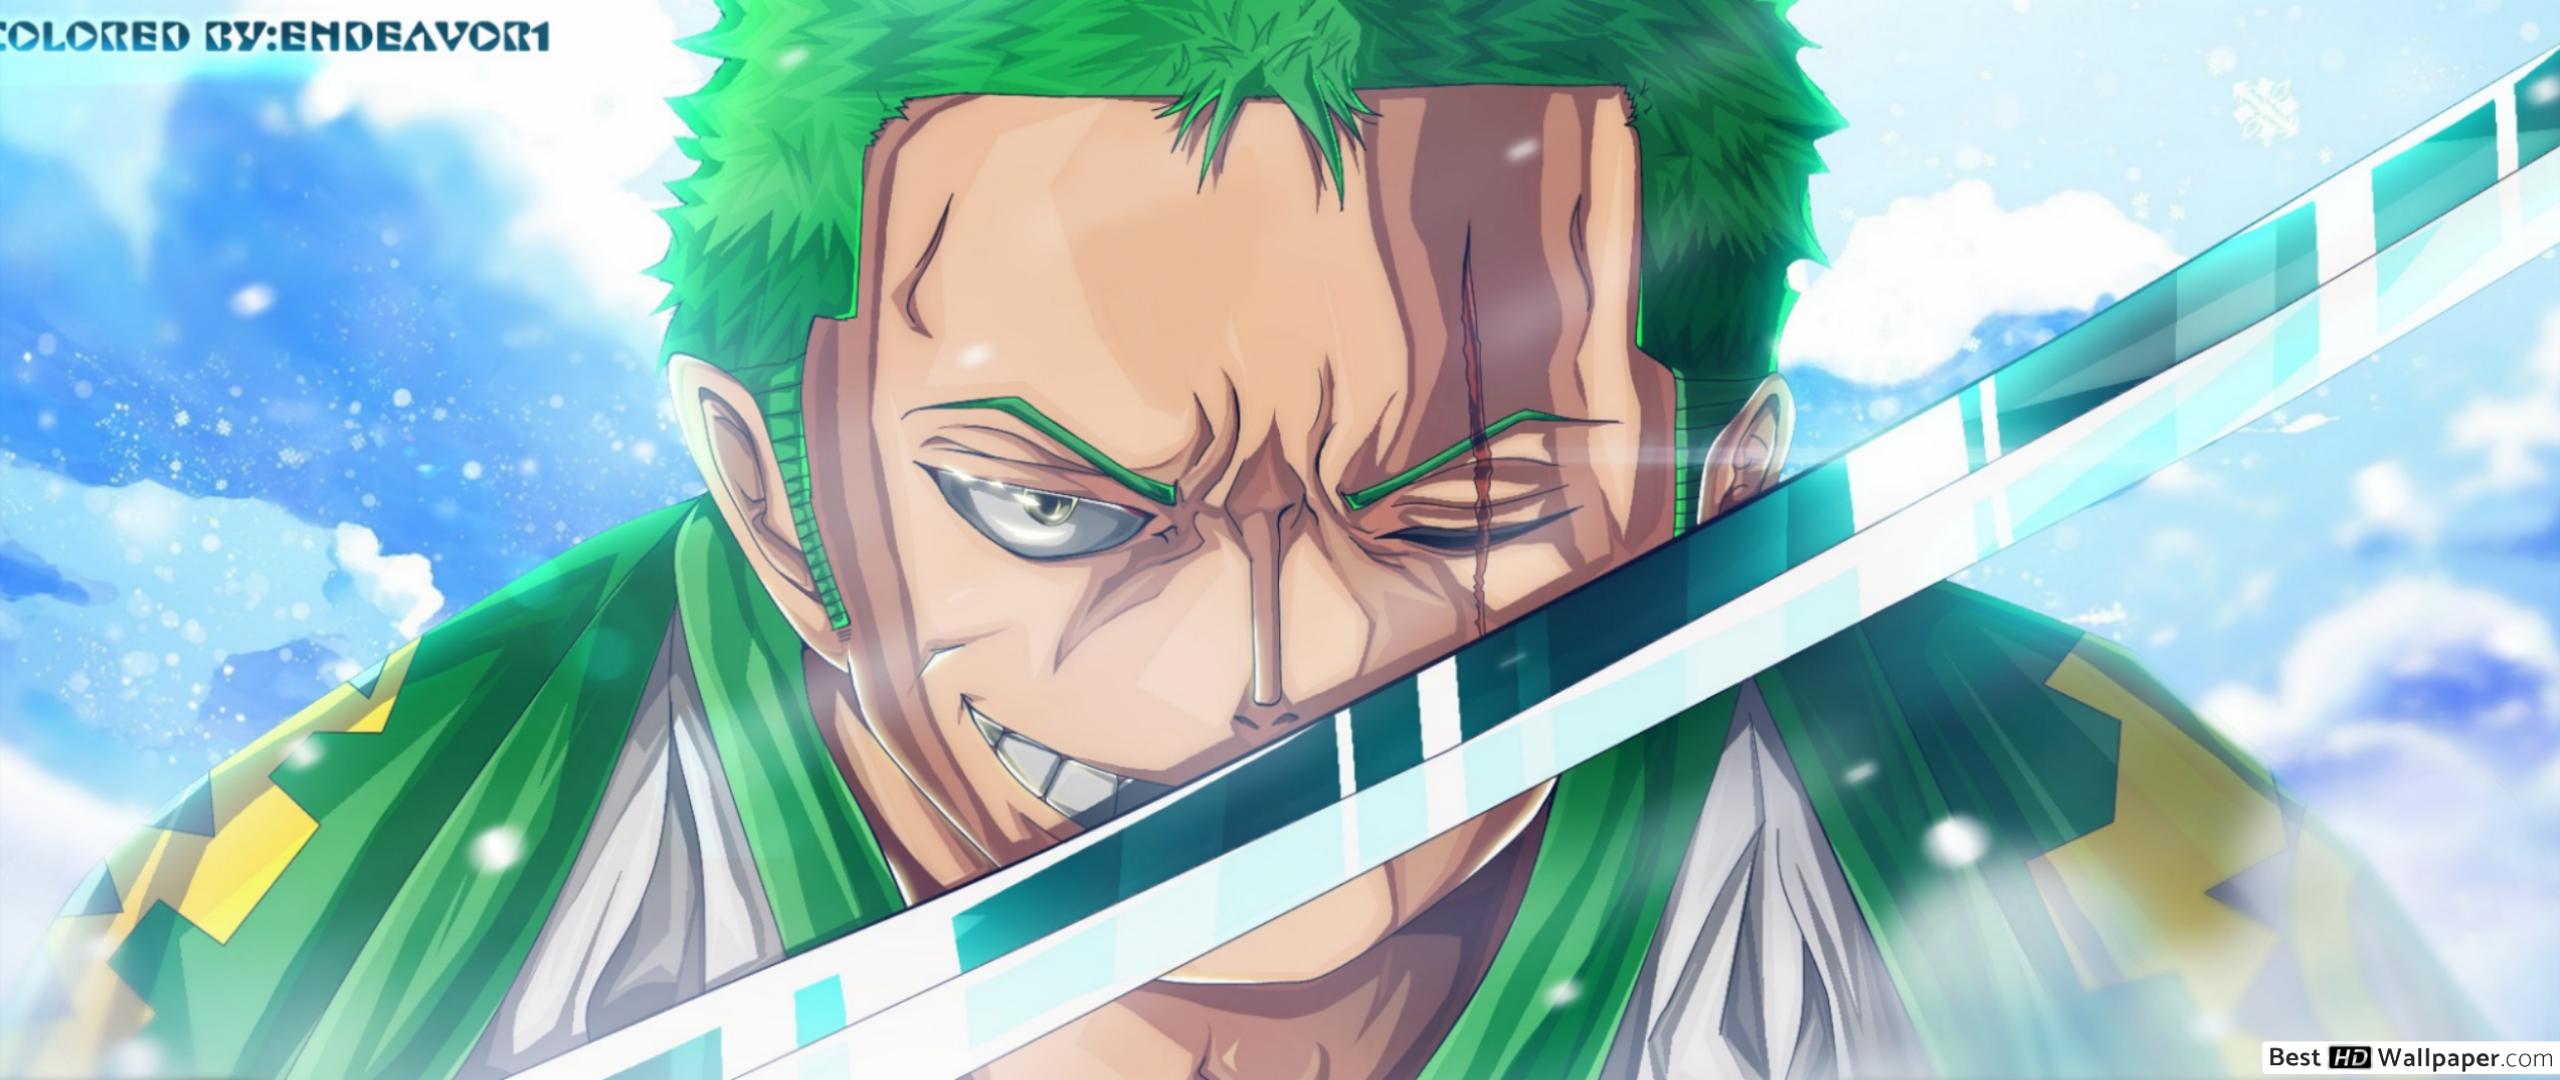 Luffy And Zoro Wano is hd wallpapers & backgrounds for desktop or